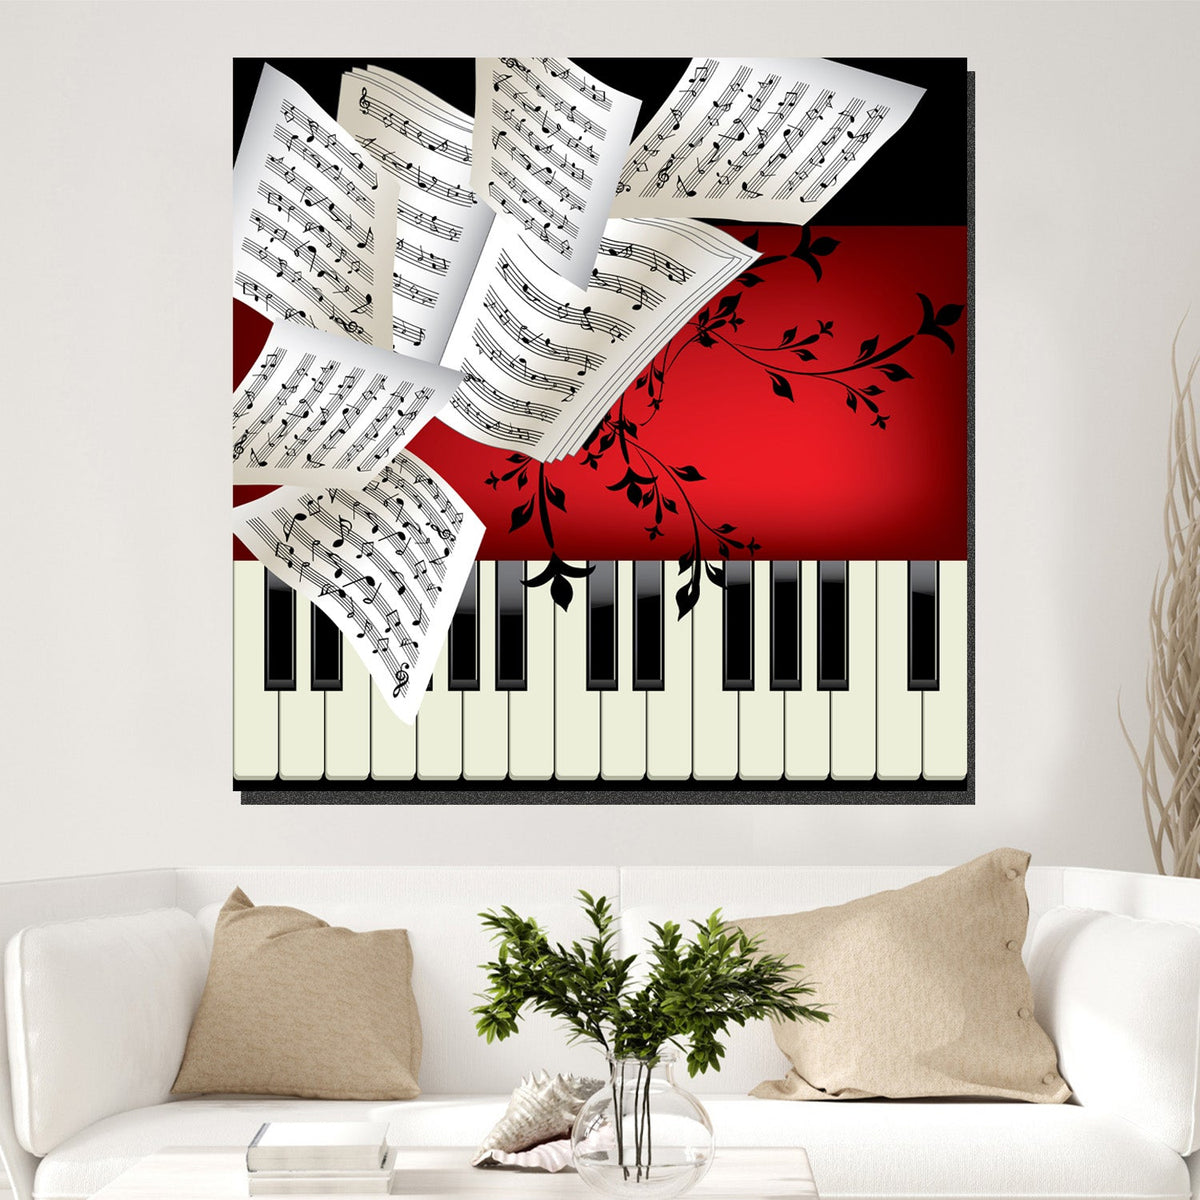 https://cdn.shopify.com/s/files/1/0387/9986/8044/products/MusicalNotesOnPianoCanvasArtprintStretched-3.jpg